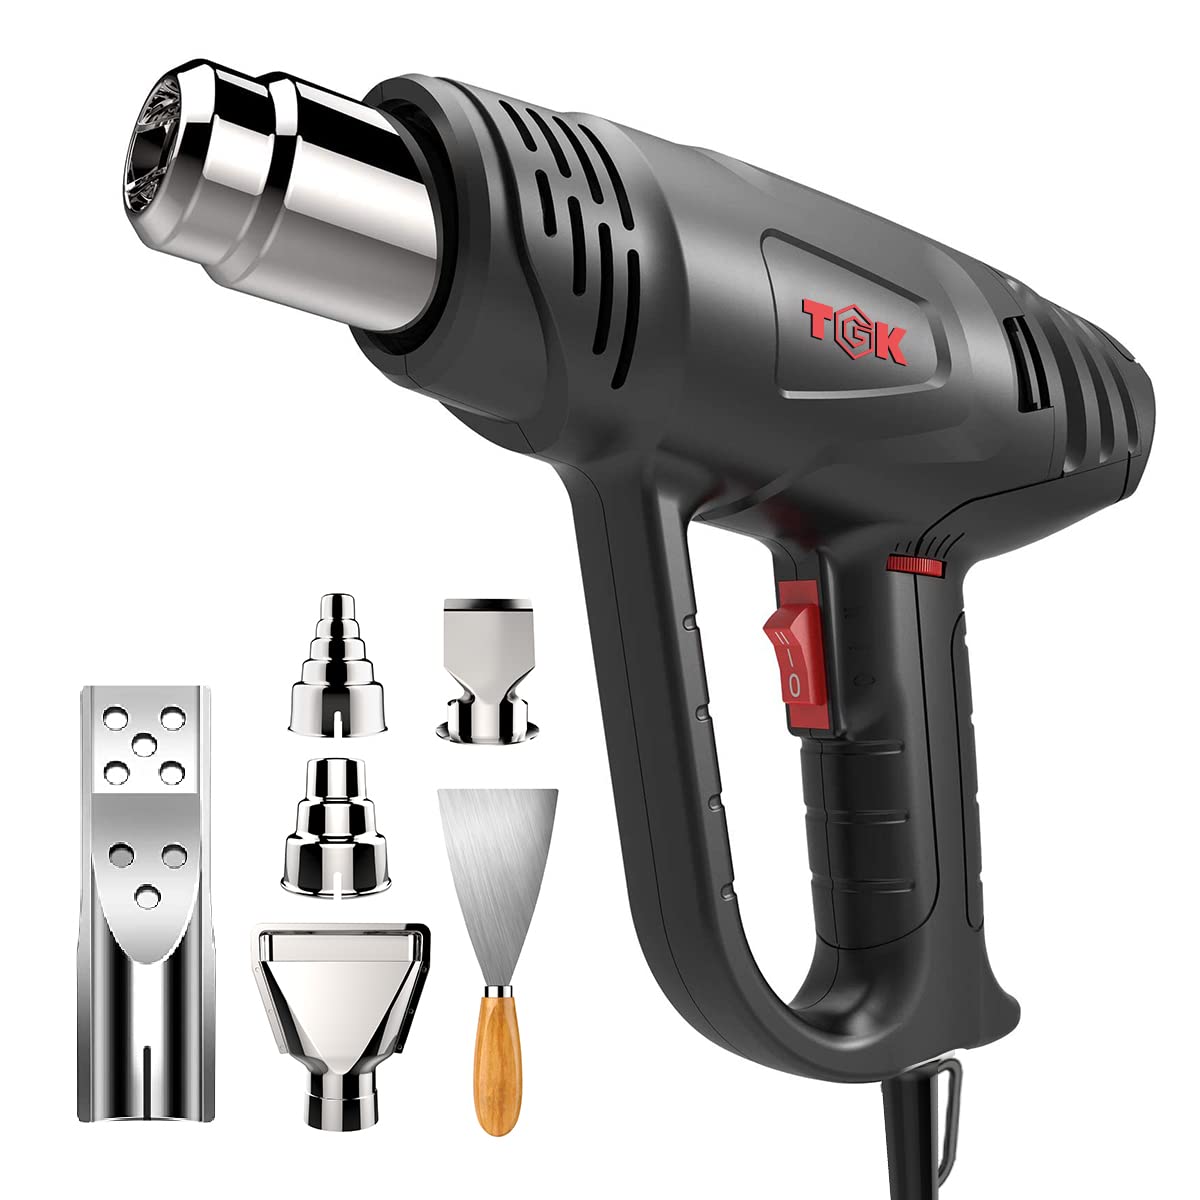 18 Years Factory Heat Gun Wood Burning - Heat Gun, TGK 1800W Heavy Duty Hot Air Gun Kit 122℉~1202℉ Dual Temperature Settings with 6 Nozzle Attachments Overload Protection for Crafts, Shrink Wrappi...